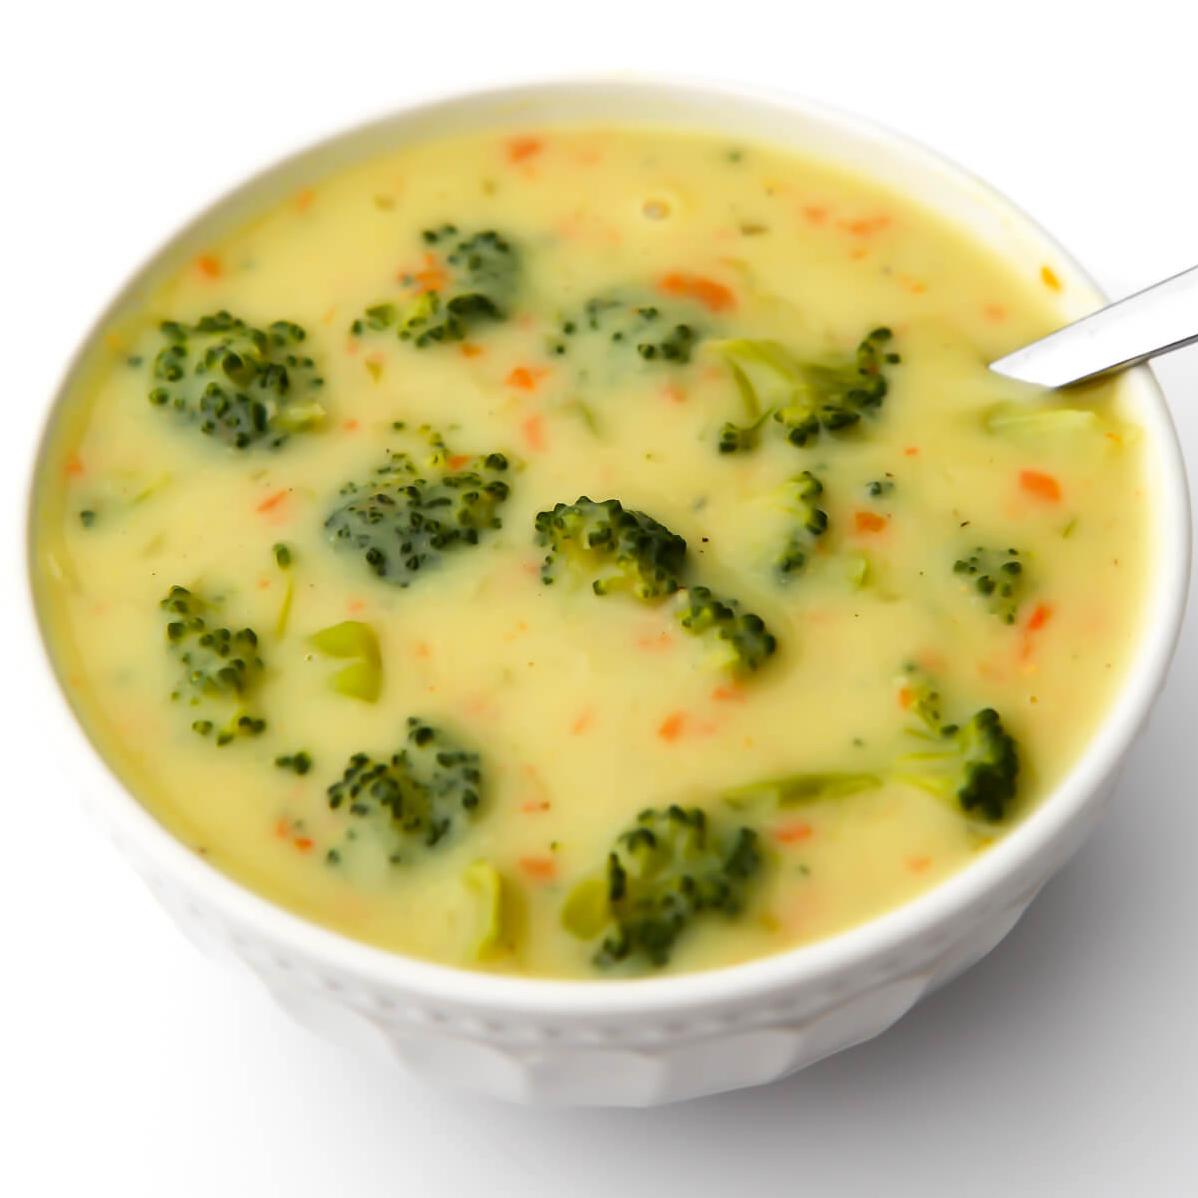  Healthy and delicious, the ultimate soup combo